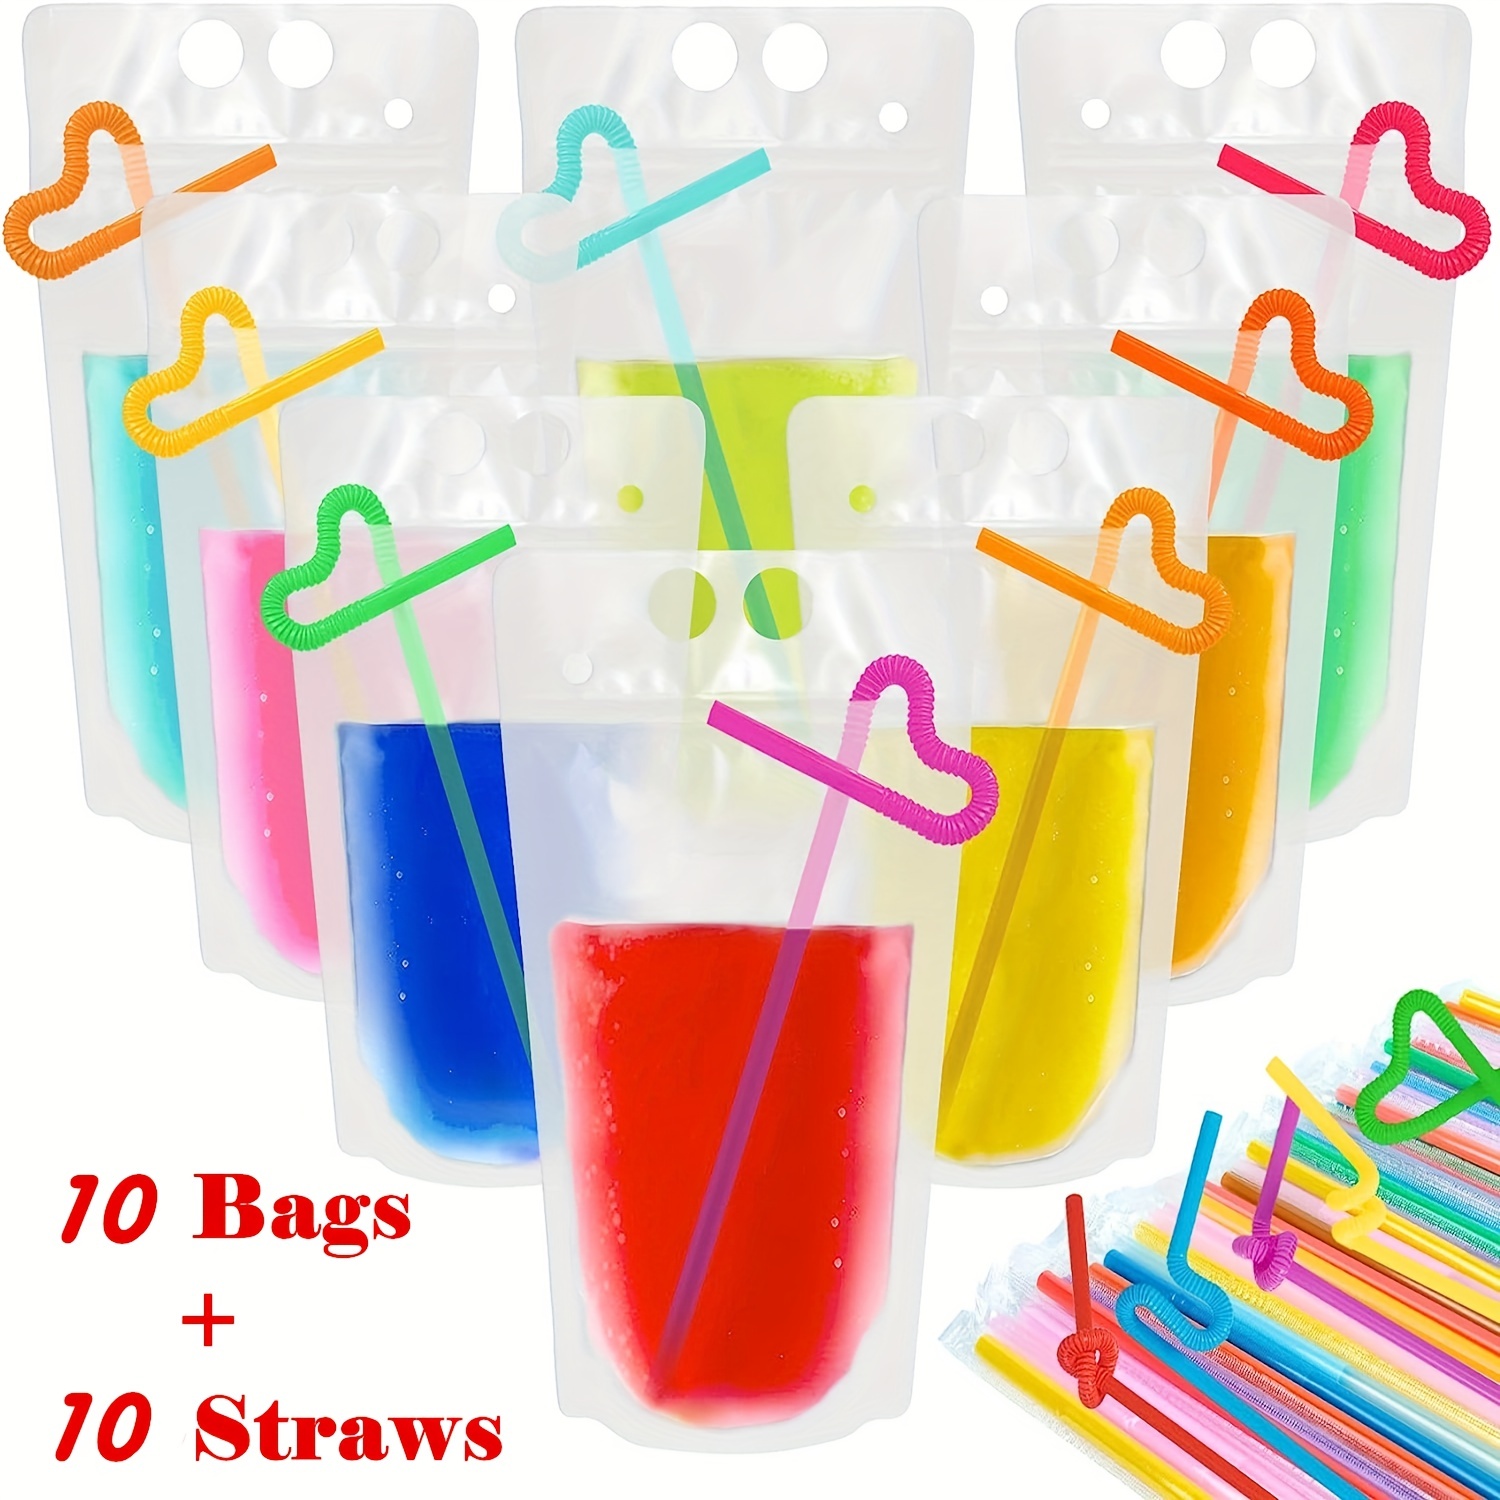 Drink Pouches Bag with Straws 20 Pack 8oz Plastic Container Reclosable Zipper Hand-Held Heavy Duty Ice Drinking Juice Pouches Bags